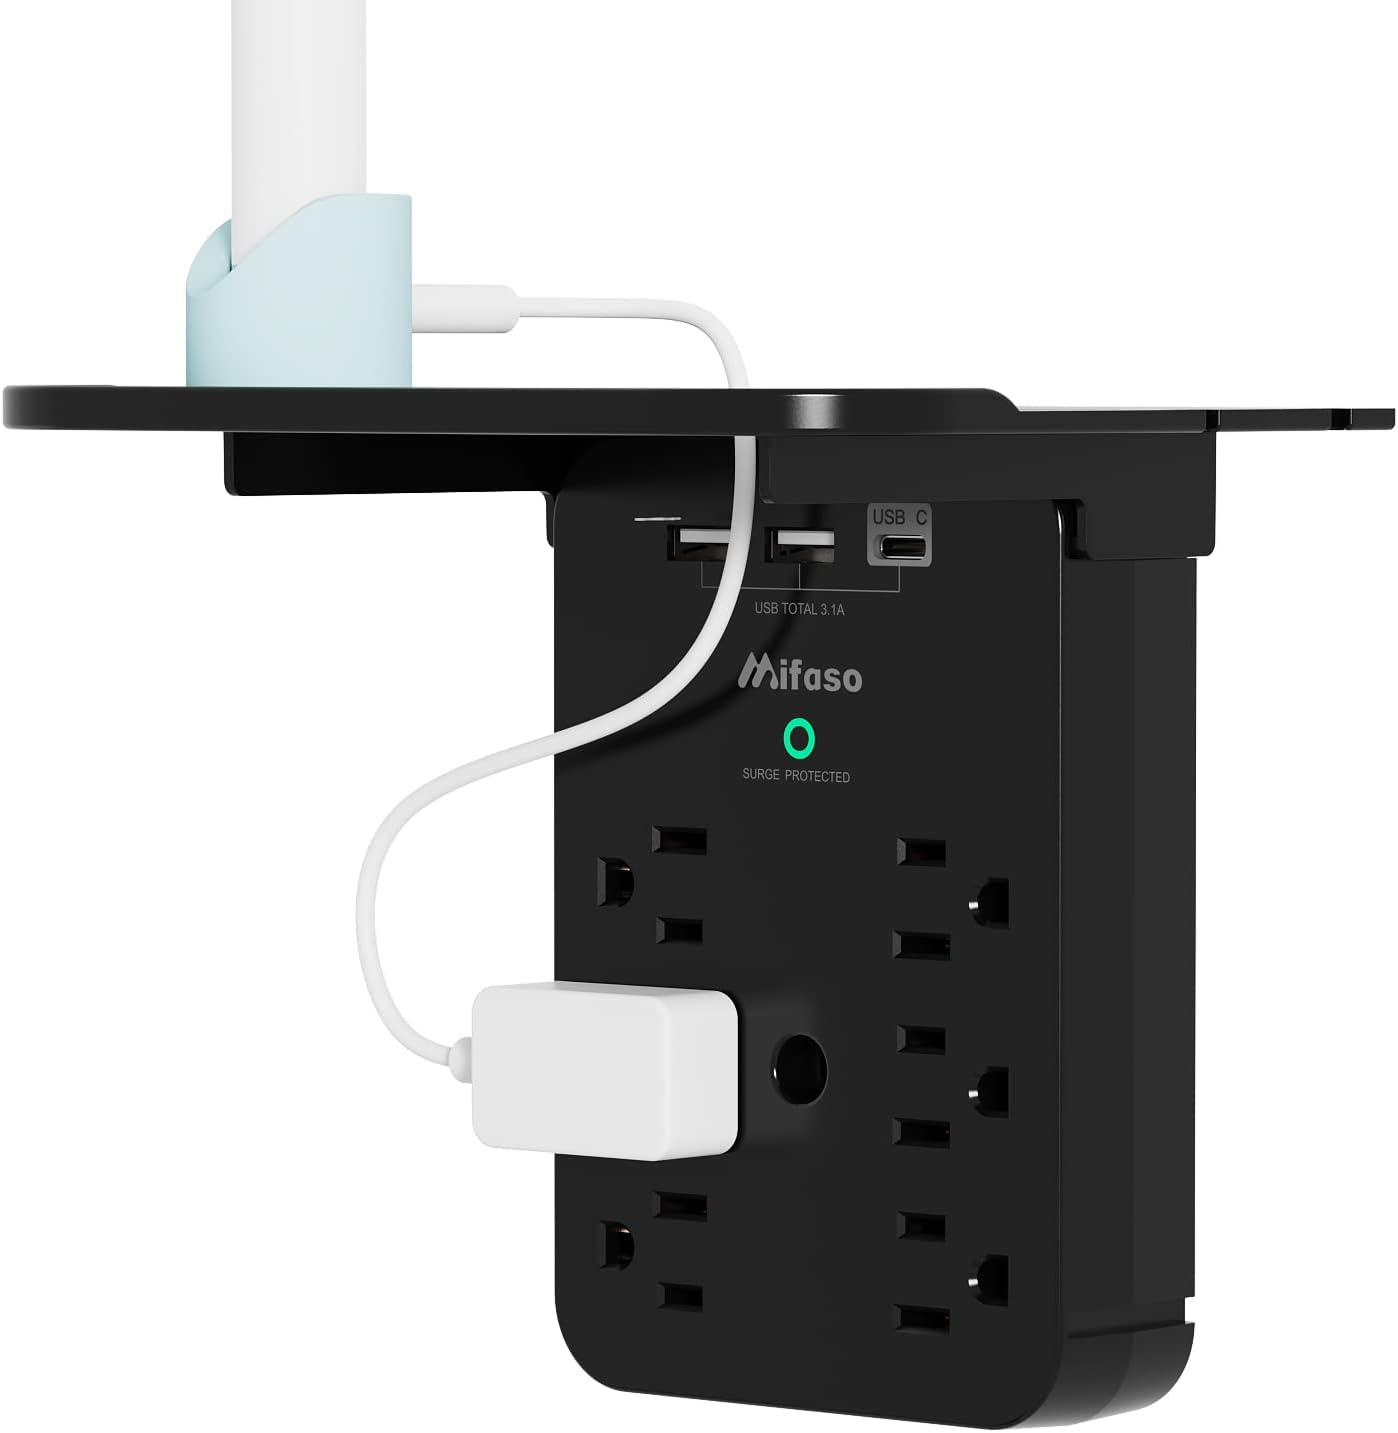 Wall Outlet Extender - Surge Protector 6 AC Outlets Multi Plug Outlet with Shelf, 2 USB and USB C Charging Ports Wall Plug Expander, USB Wall Charger Outlet Splitter for Home (Black)